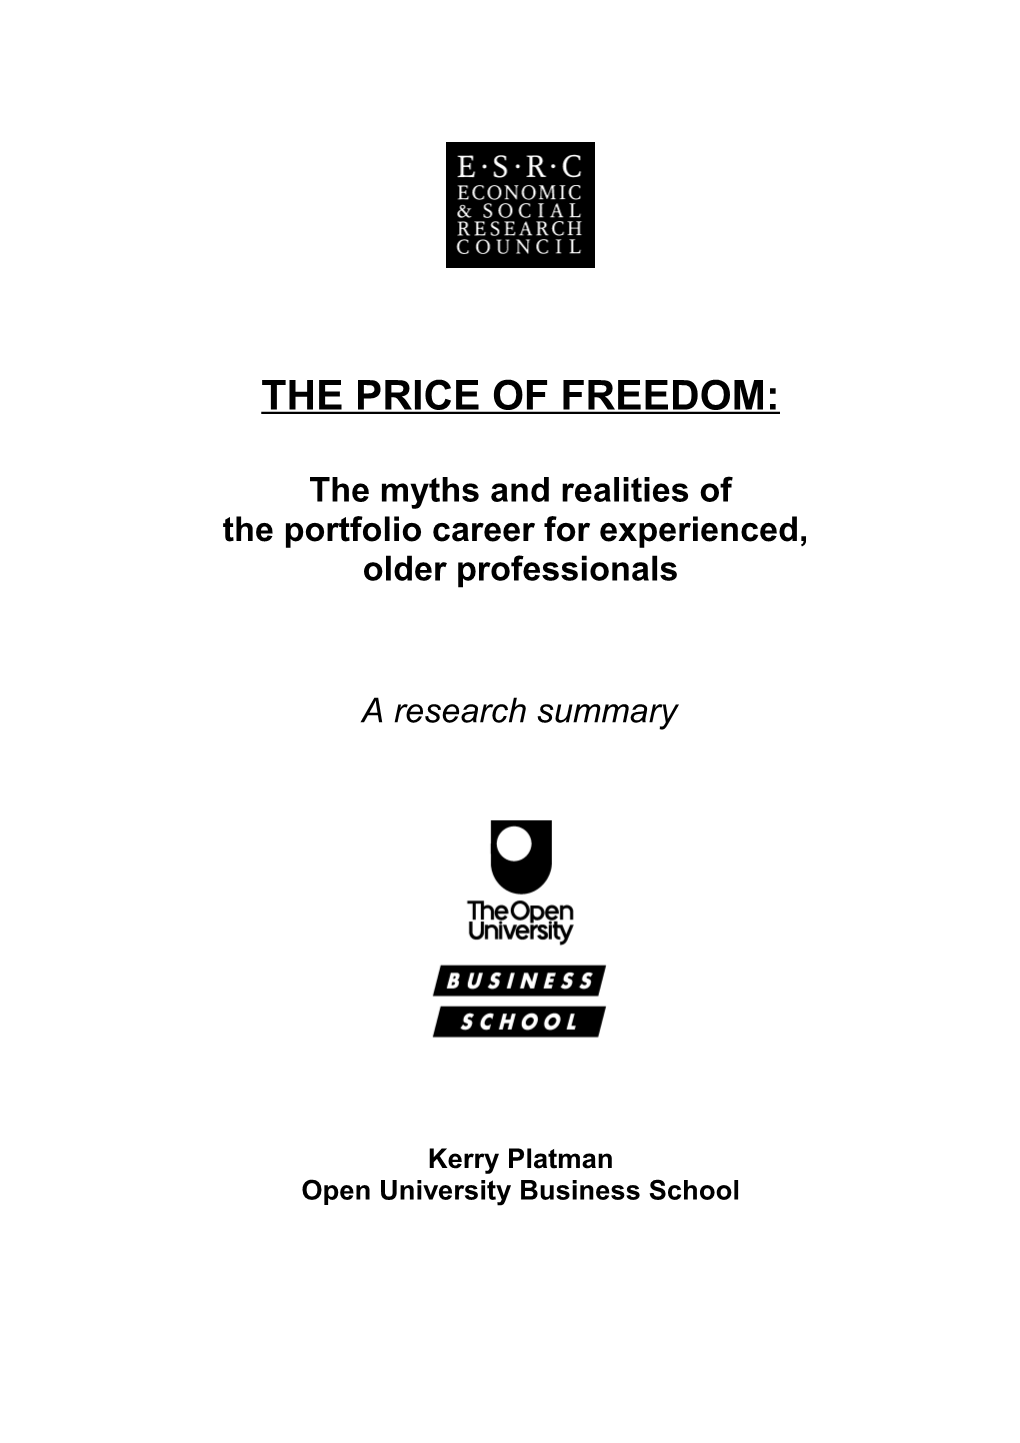 The Price of Freedom: Managing Freelance Employment in the 21St Century